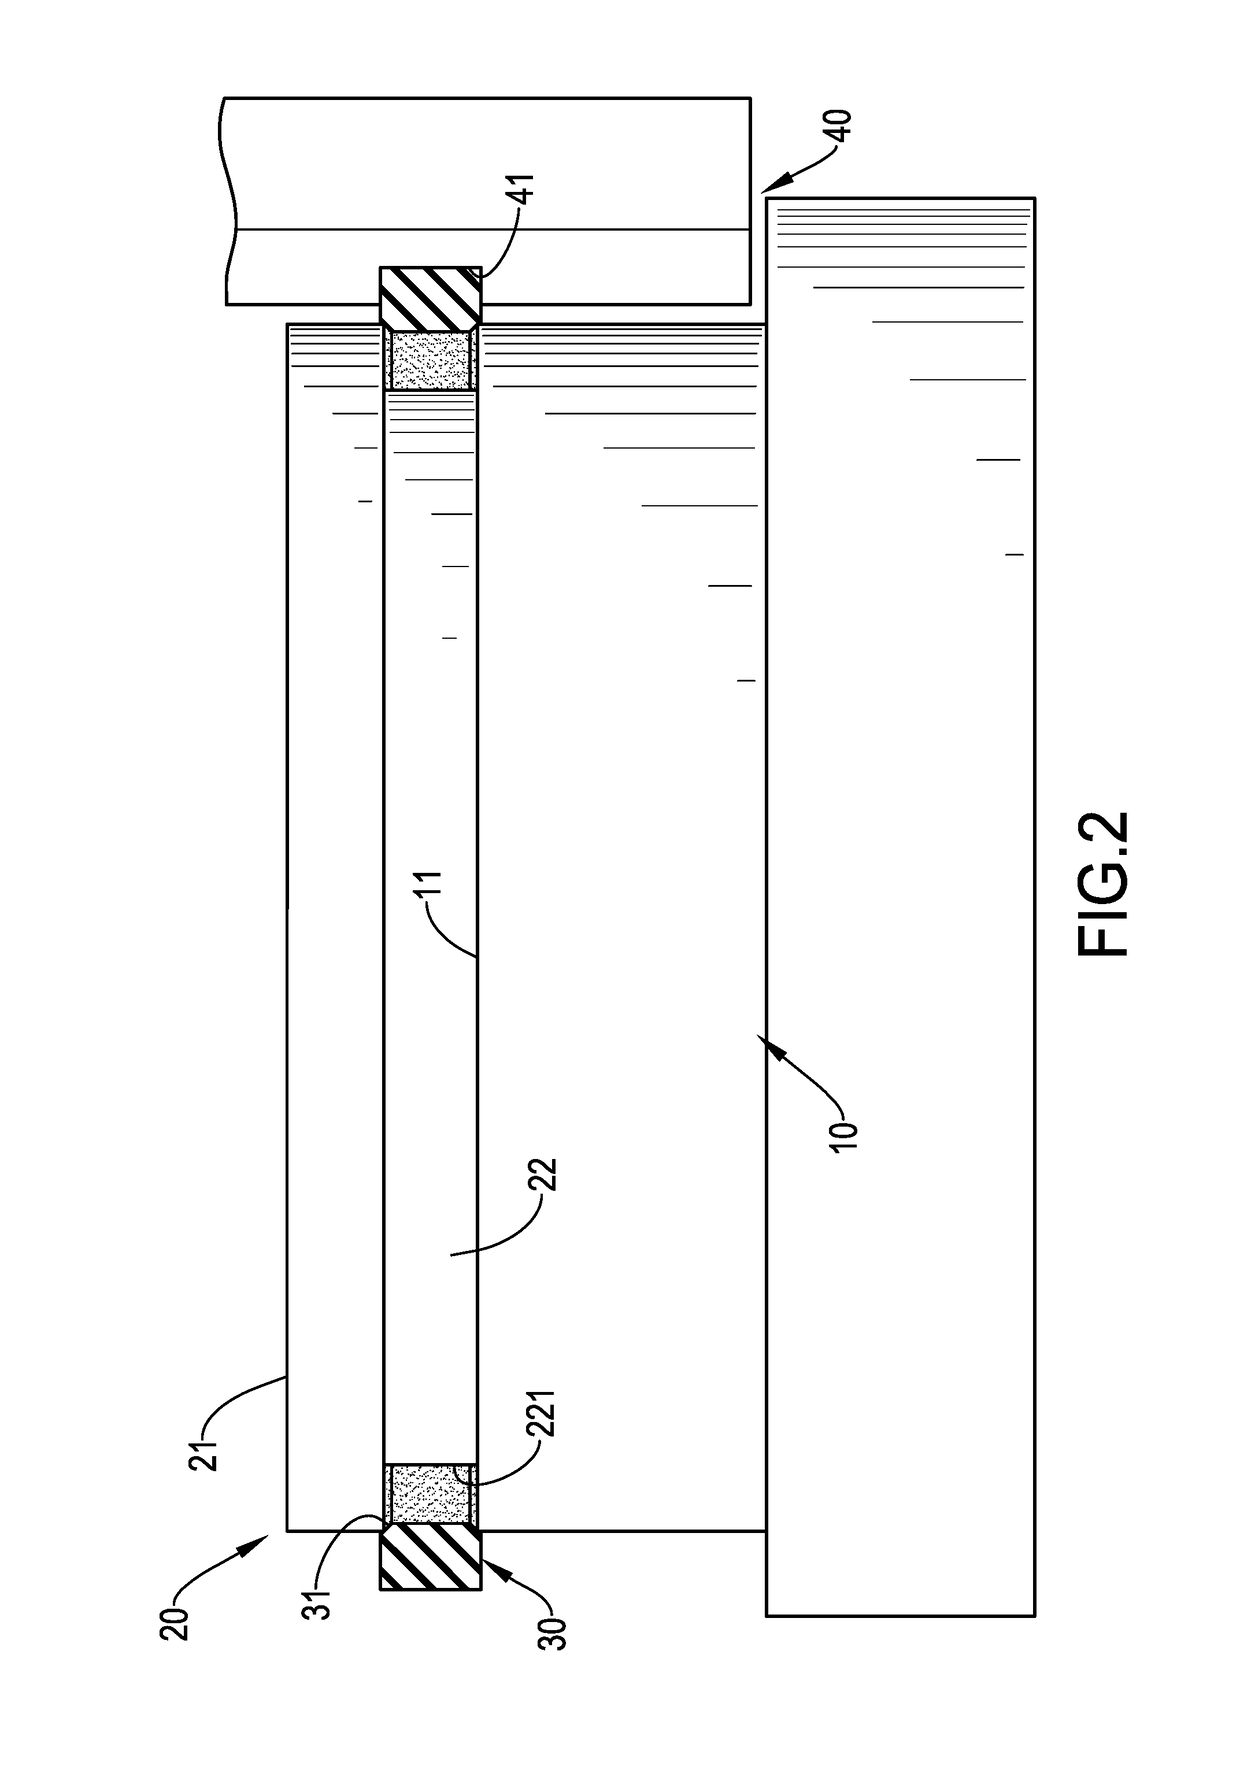 Method of installing elastomer ring in semiconductor processing equipment and guiding sheet and jig used in installing elastomer ring